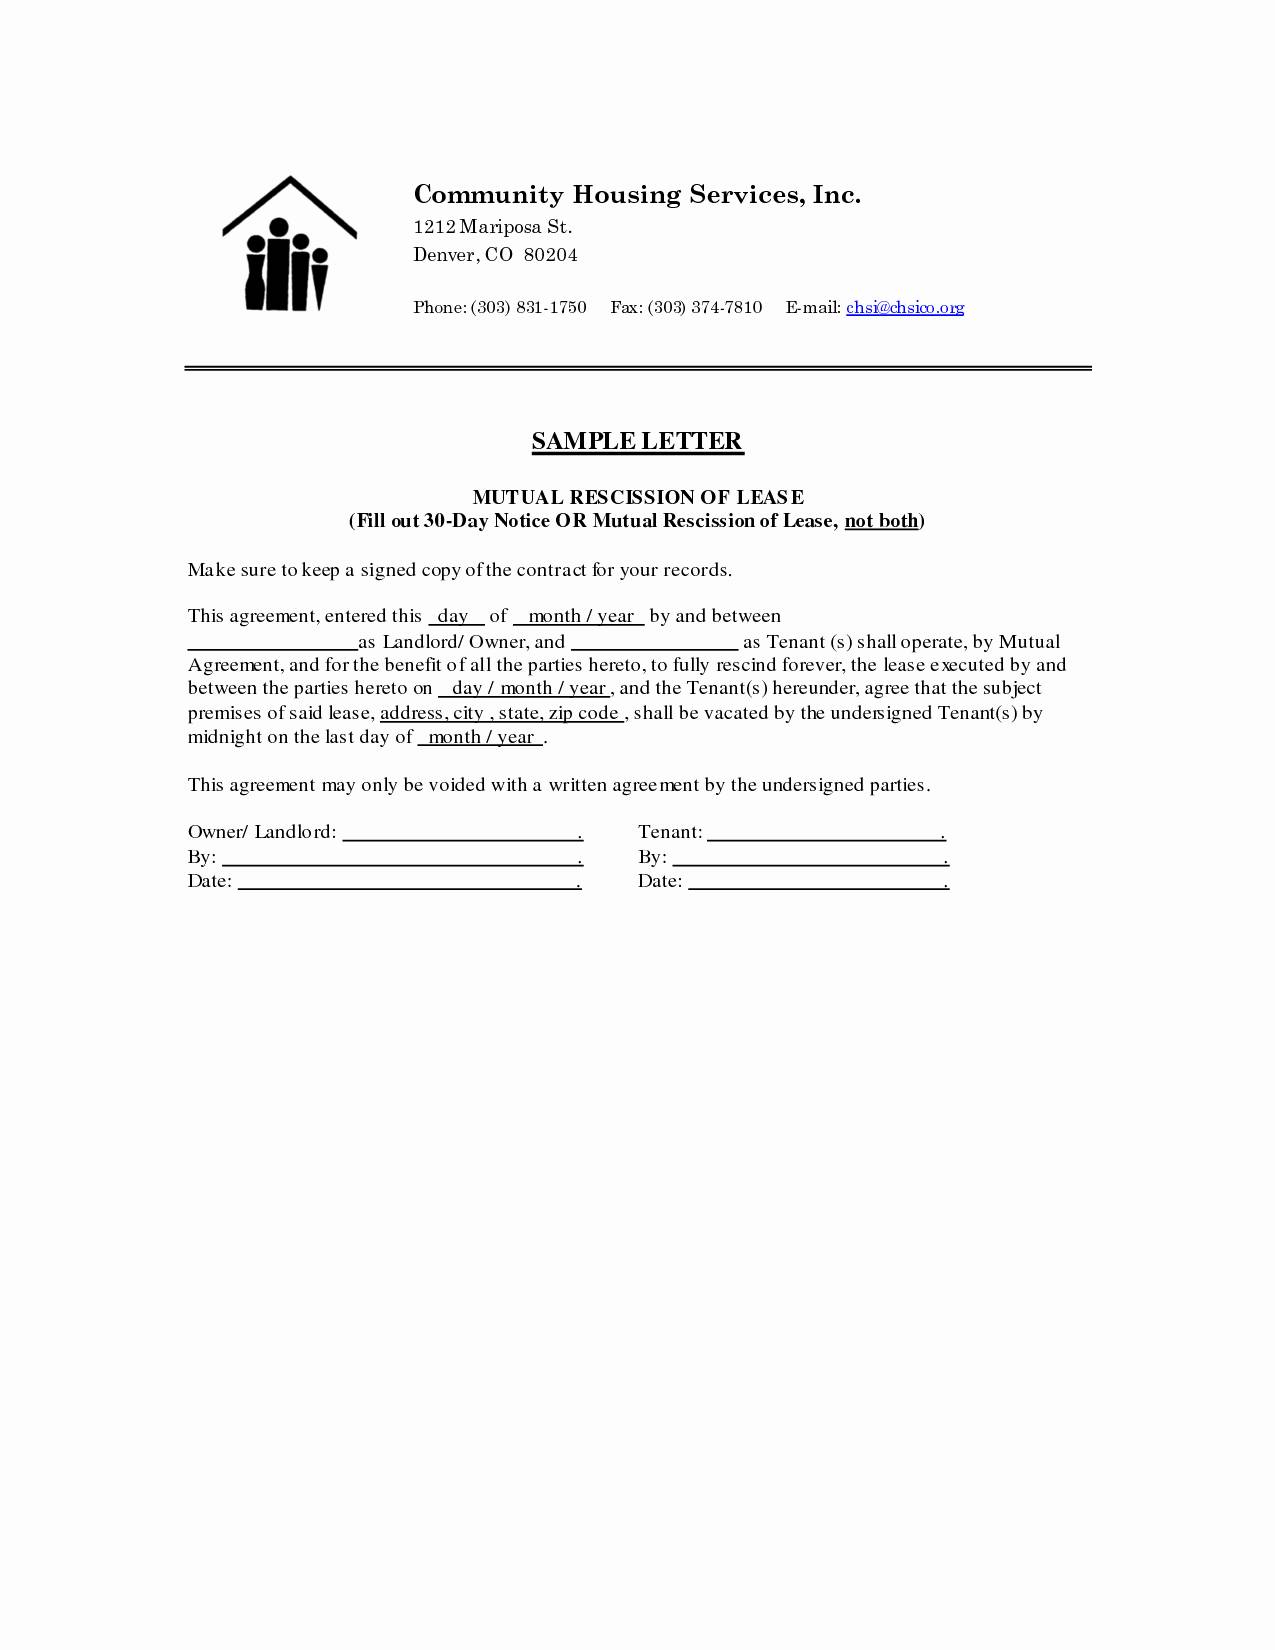 Giving Notice to Tenants Letter Template - Tenant Eviction Letter Template Awesome 19 Best Demotion Letter